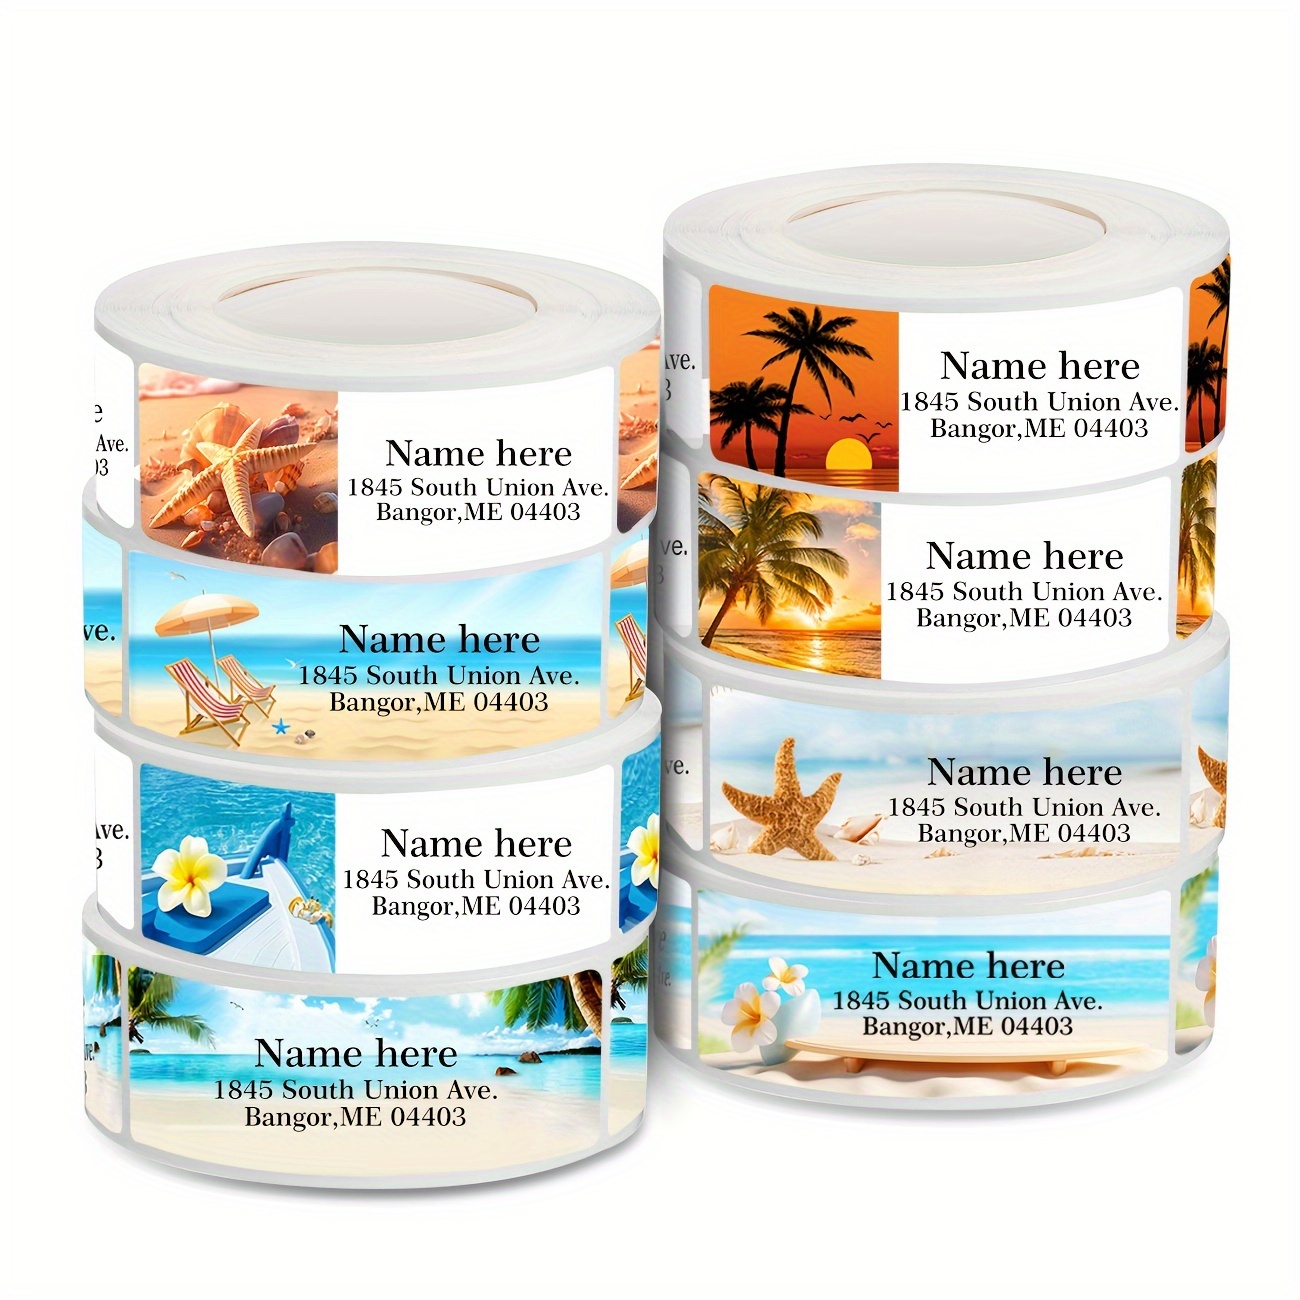 

Tropical Landscape Personalized Mailing Address Labels, Custom Self-adhesive Label Roll With Colorful Beach Scenes, Paper Address Stickers - 2.5" X 0.75", Pack Of 60/250